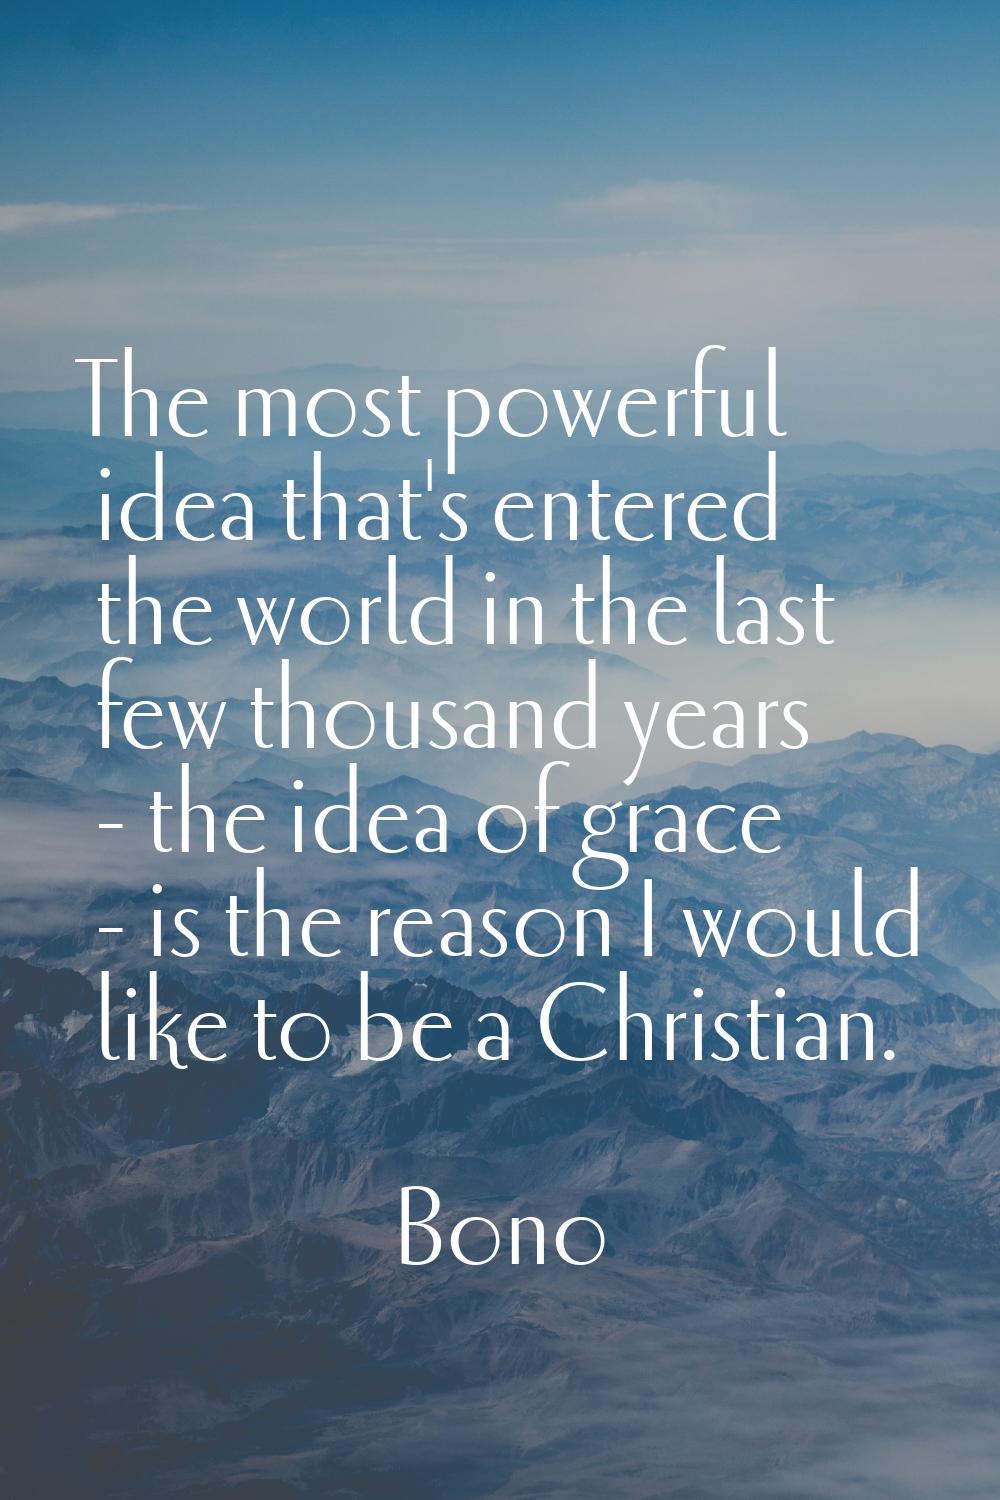 The most powerful idea that's entered the world in the last few thousand years - the idea of grace 